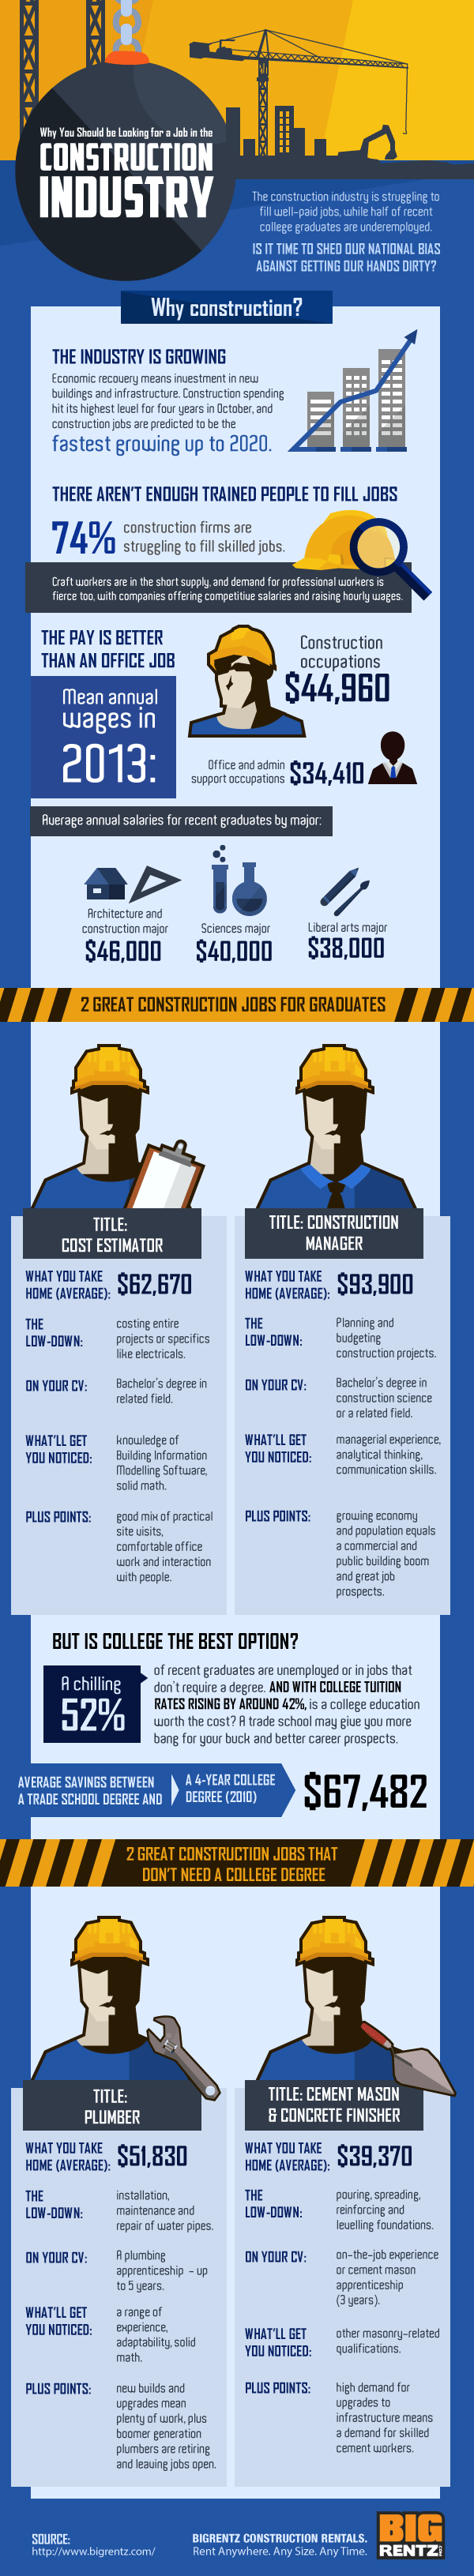 Construction Careers vs. a College Education, Which Pays Out More?